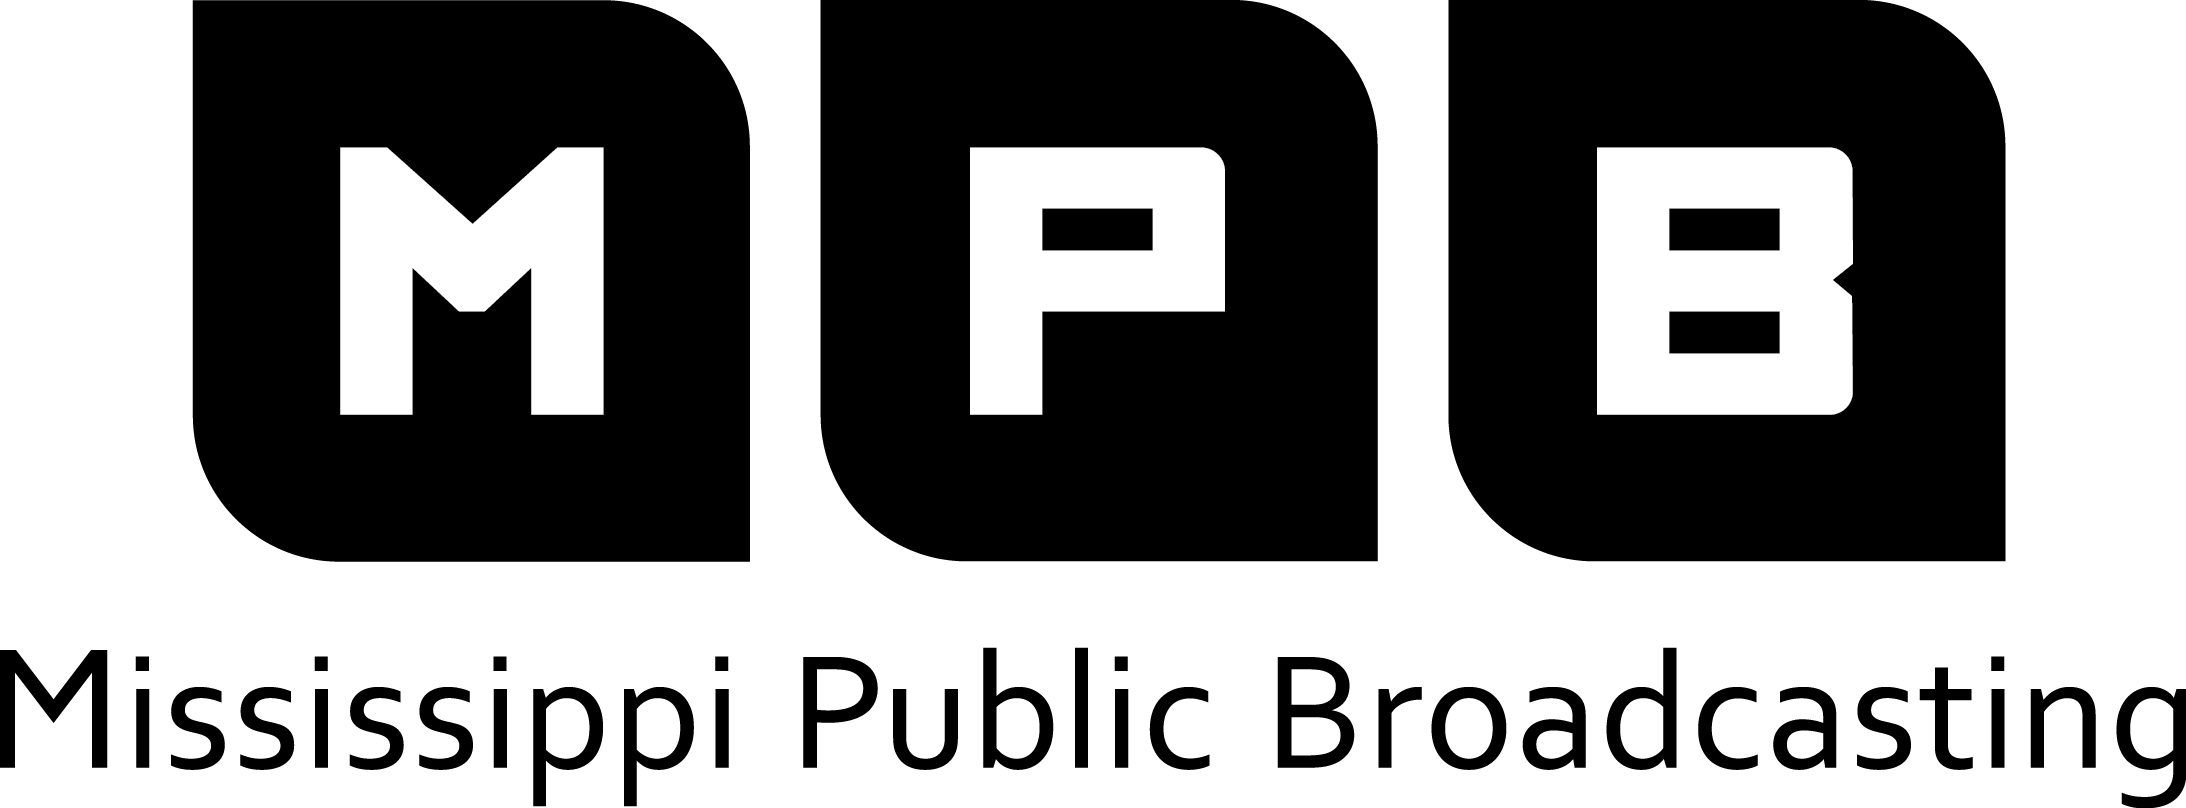 Mississippi Public Broadcasting Black Logo On A White Background In PNG Format